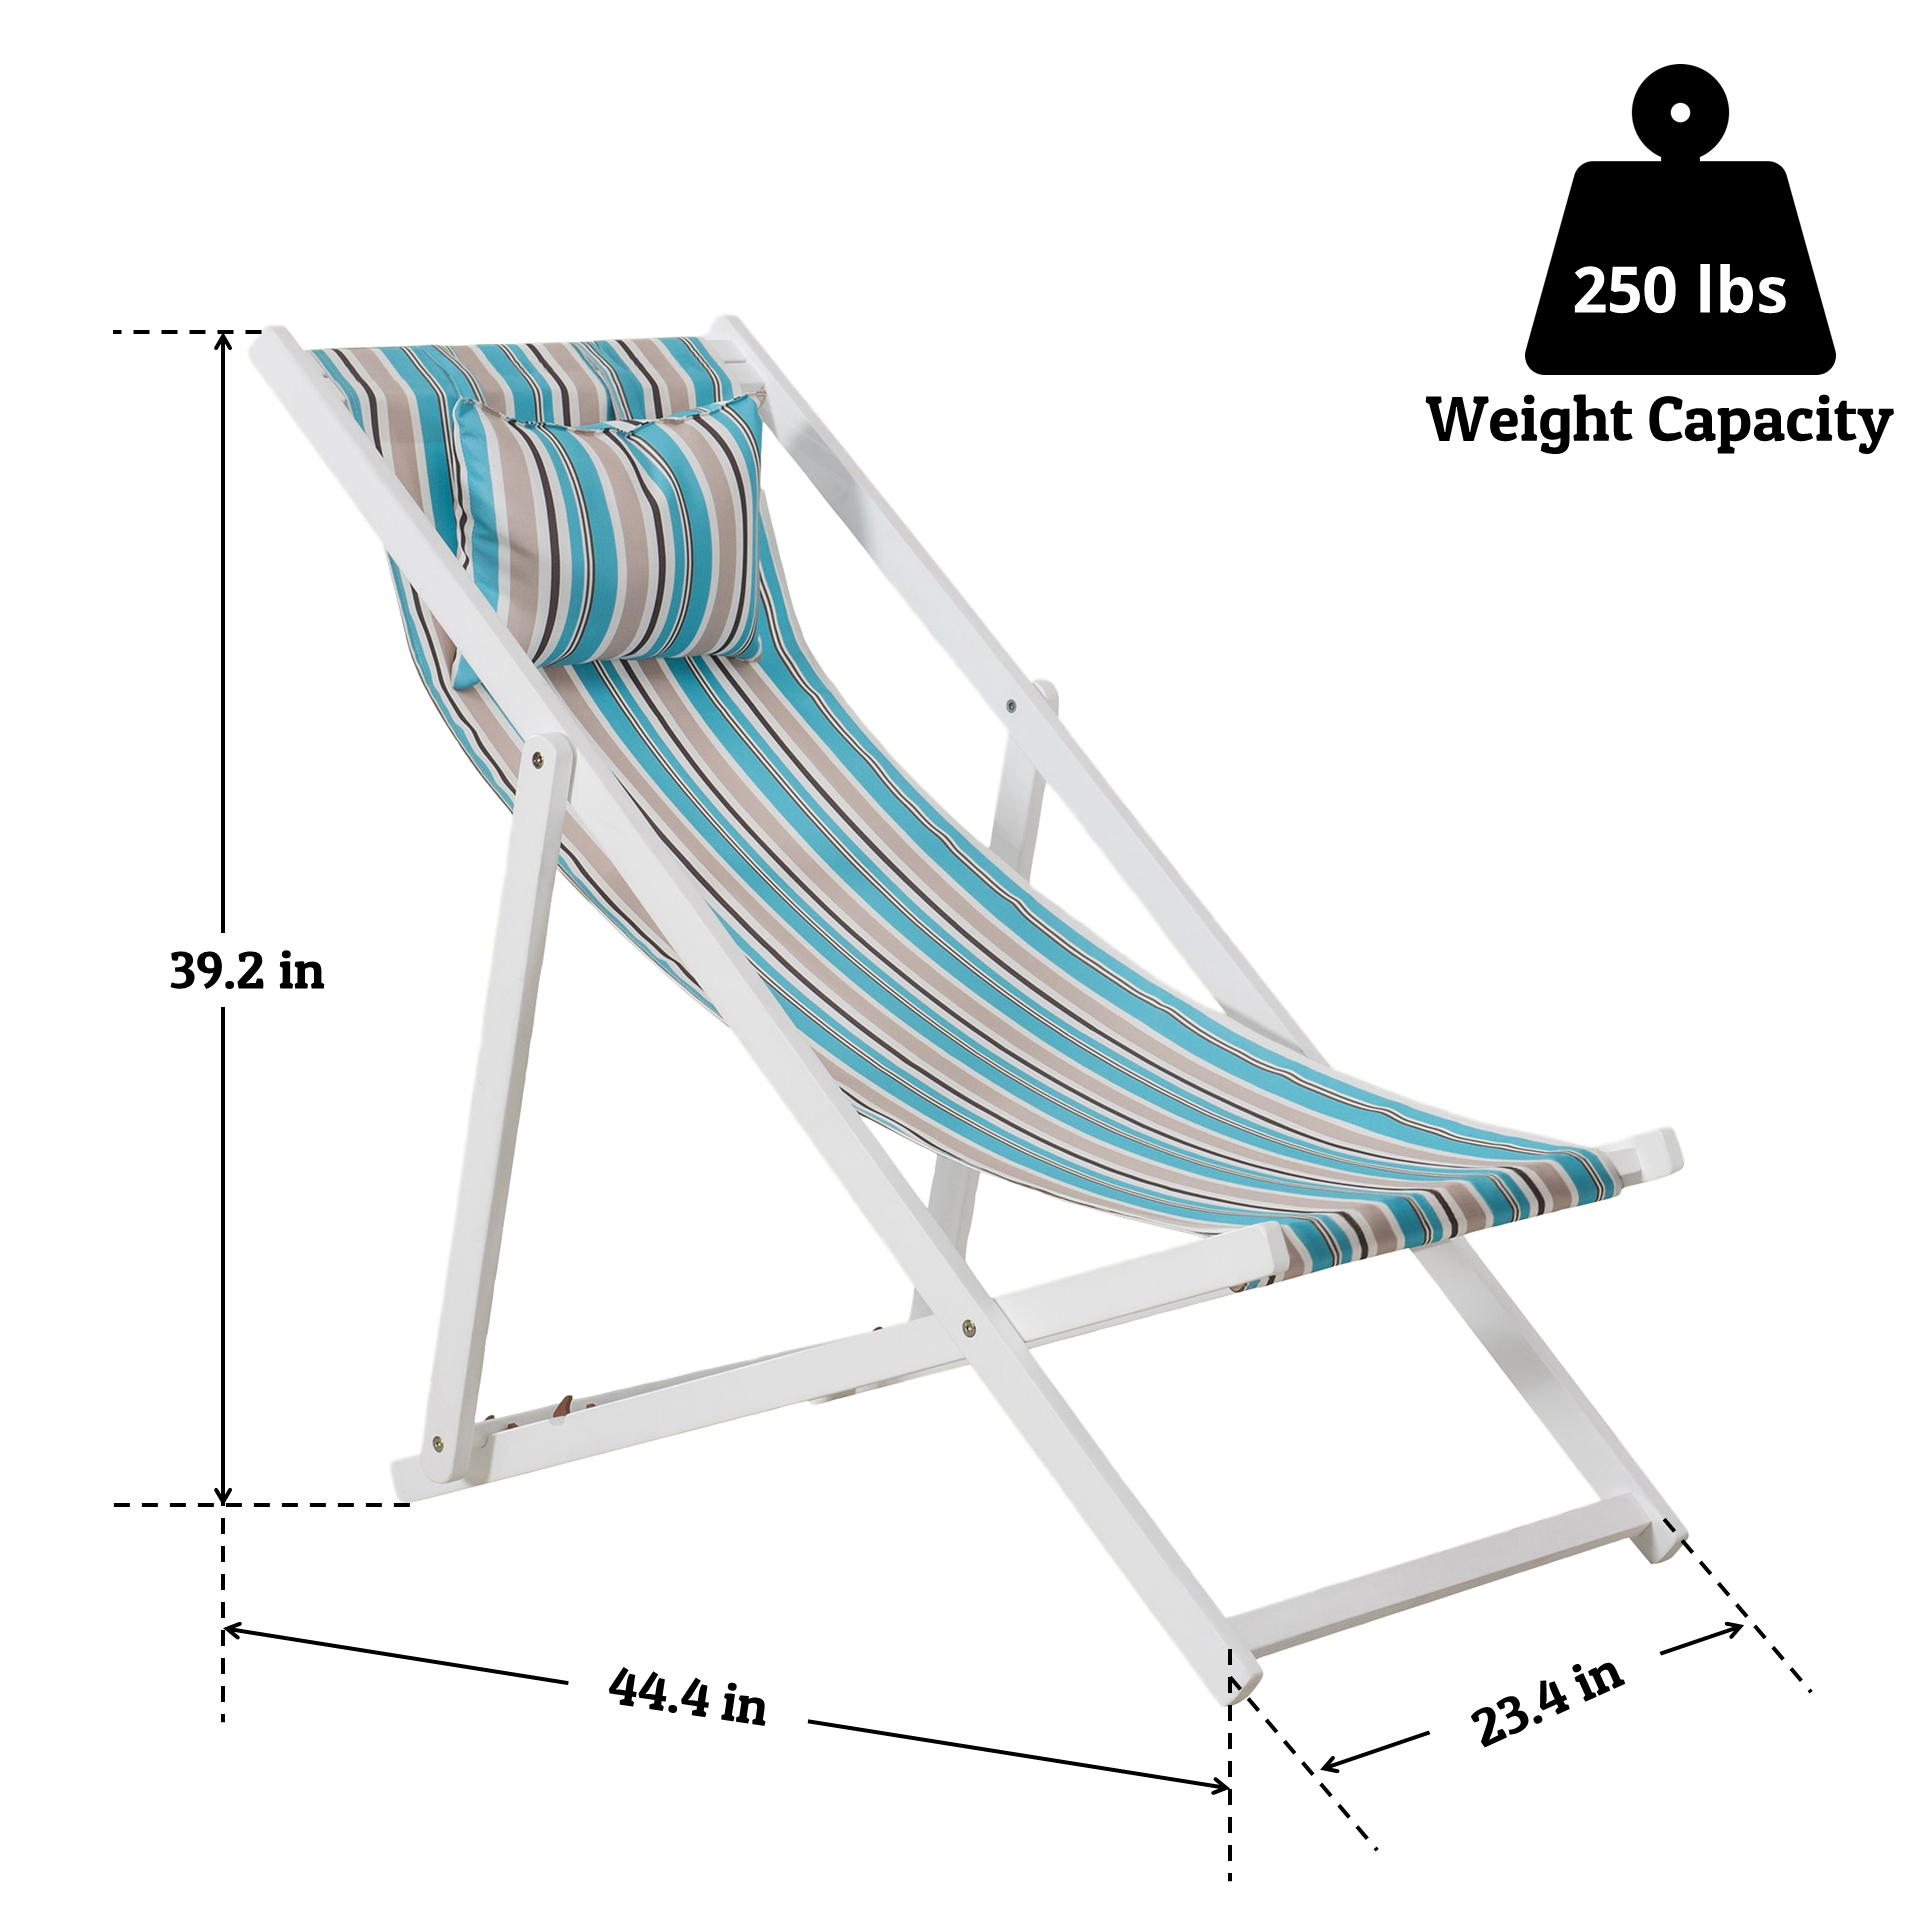 Sunjoy Belton Folding Reclining Beach Chair with Cushioned Headrest, Wood Sling Chair for Outdoor Seating, Lightweight Camping Chaise Lounge Chair - image 3 of 11